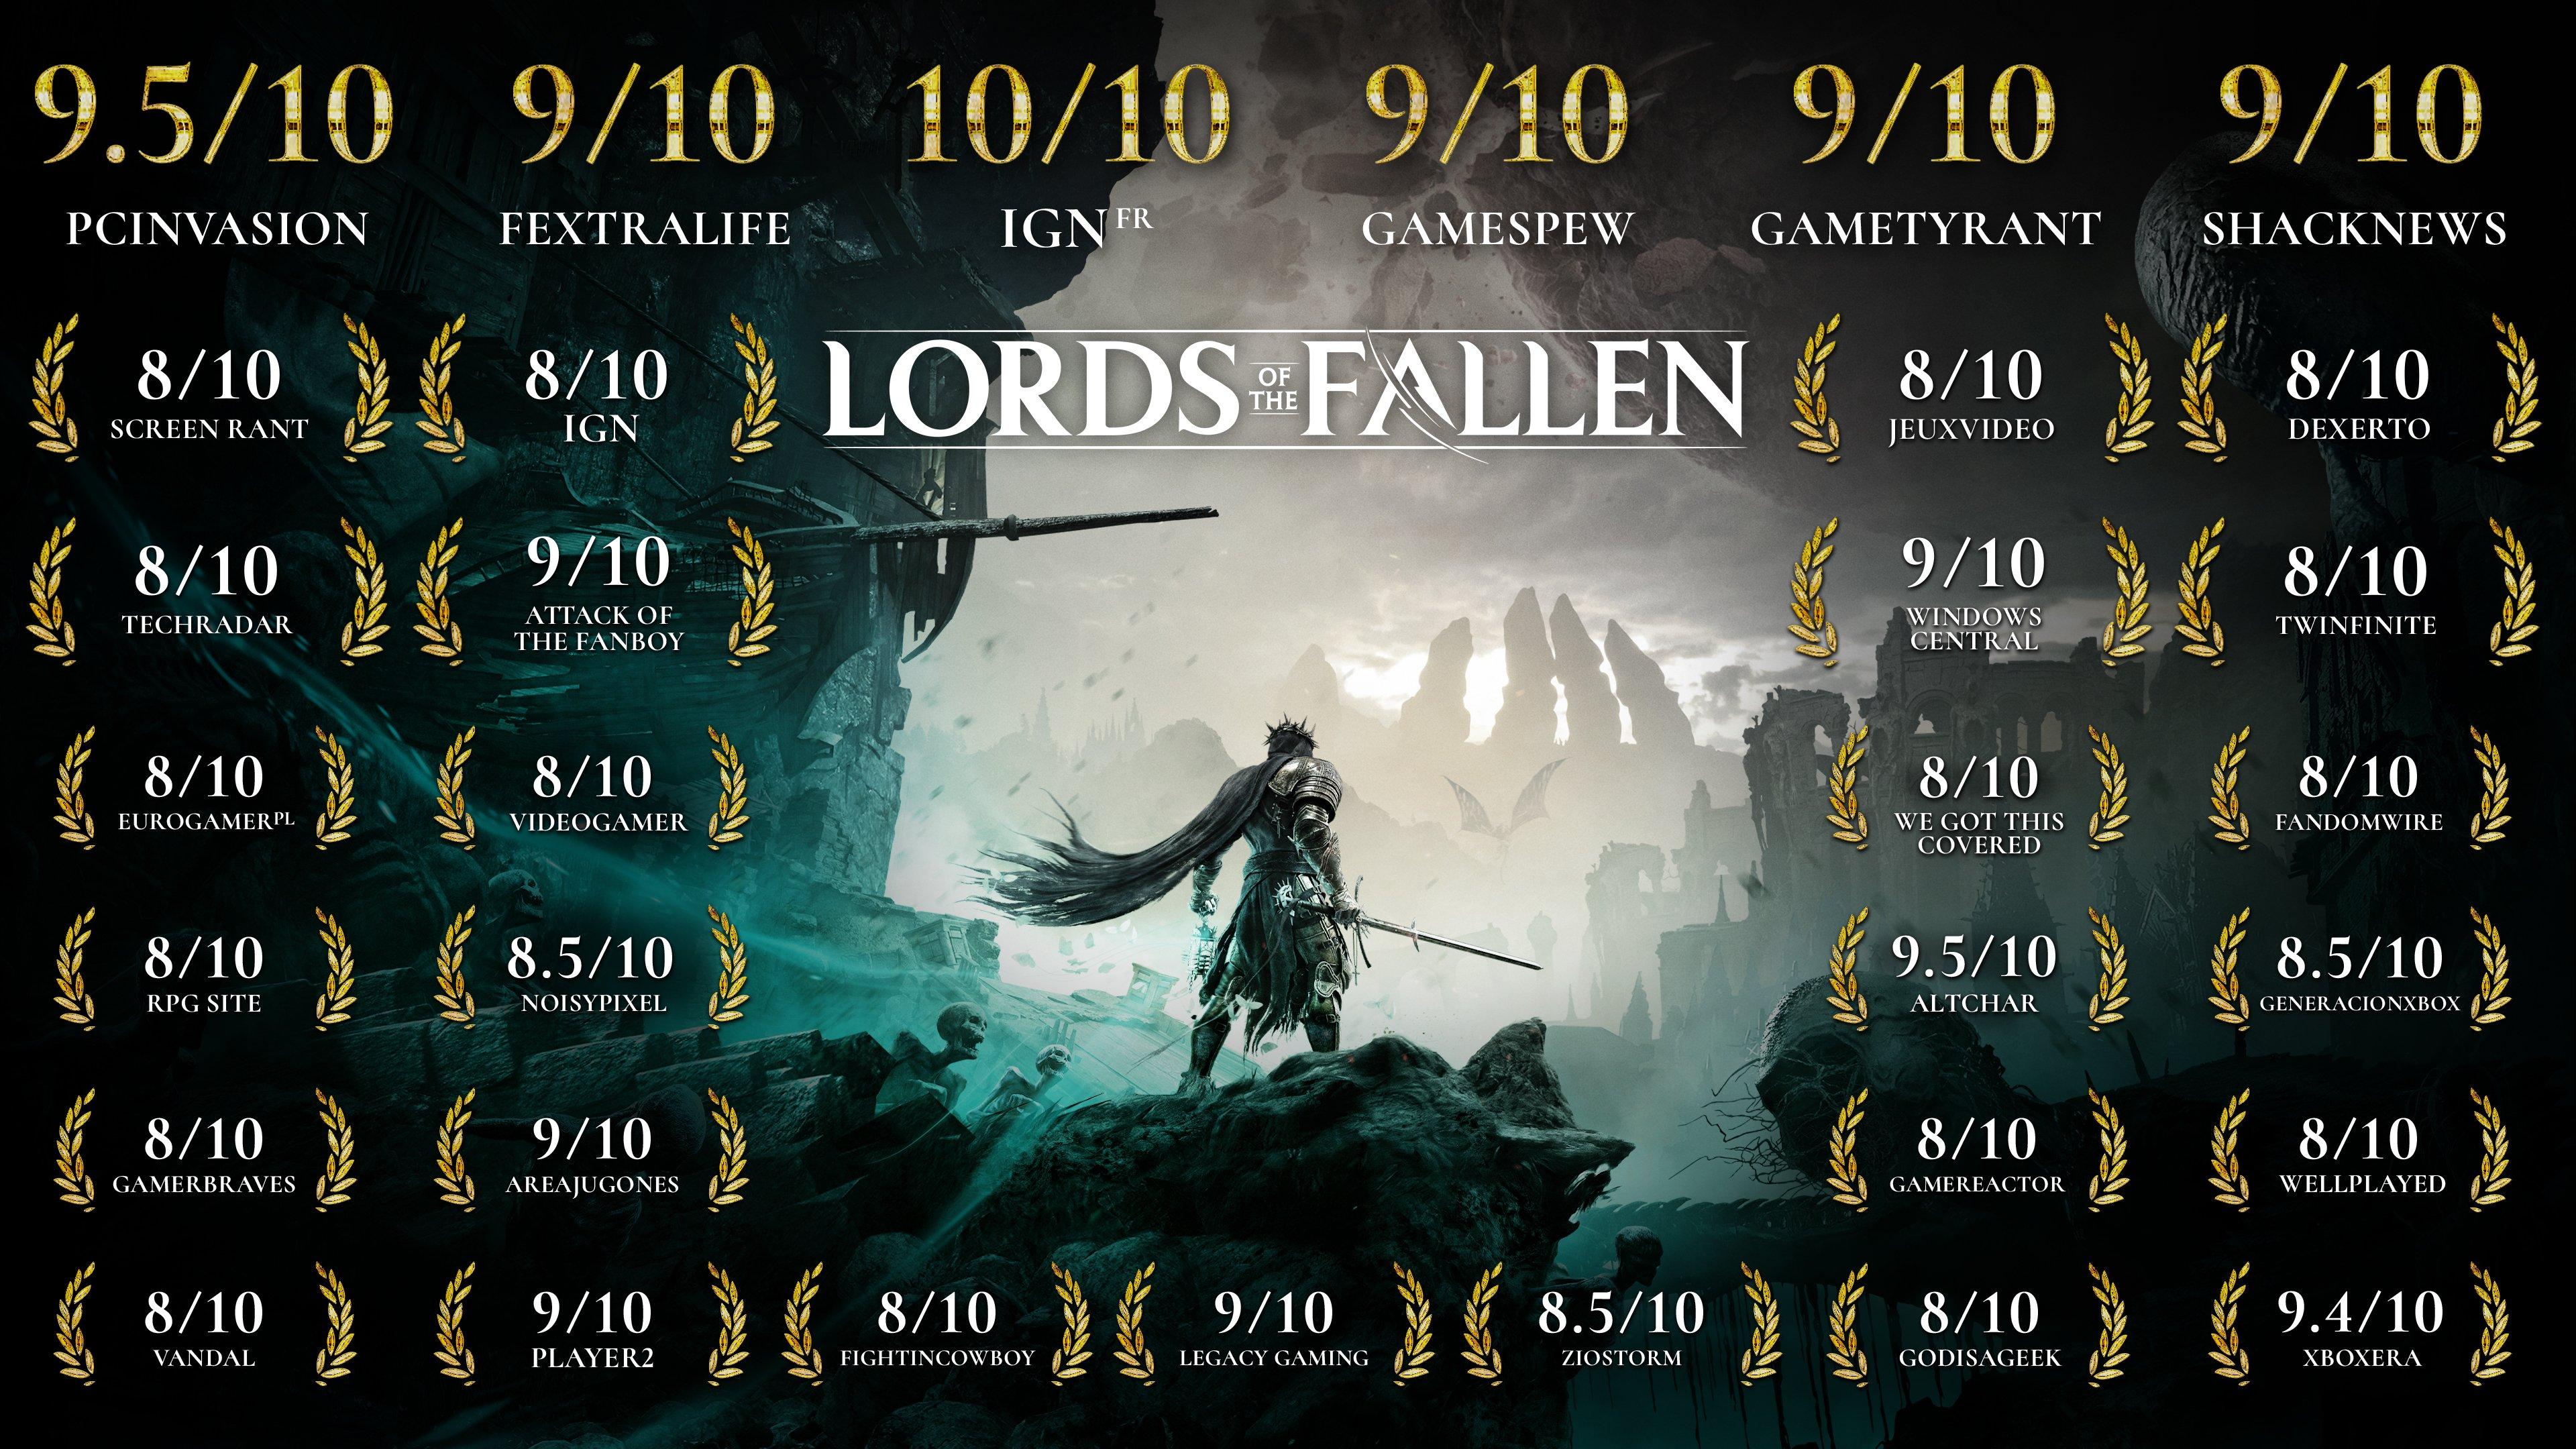 Lords of the Fallen Steelbook - Collector's Editions